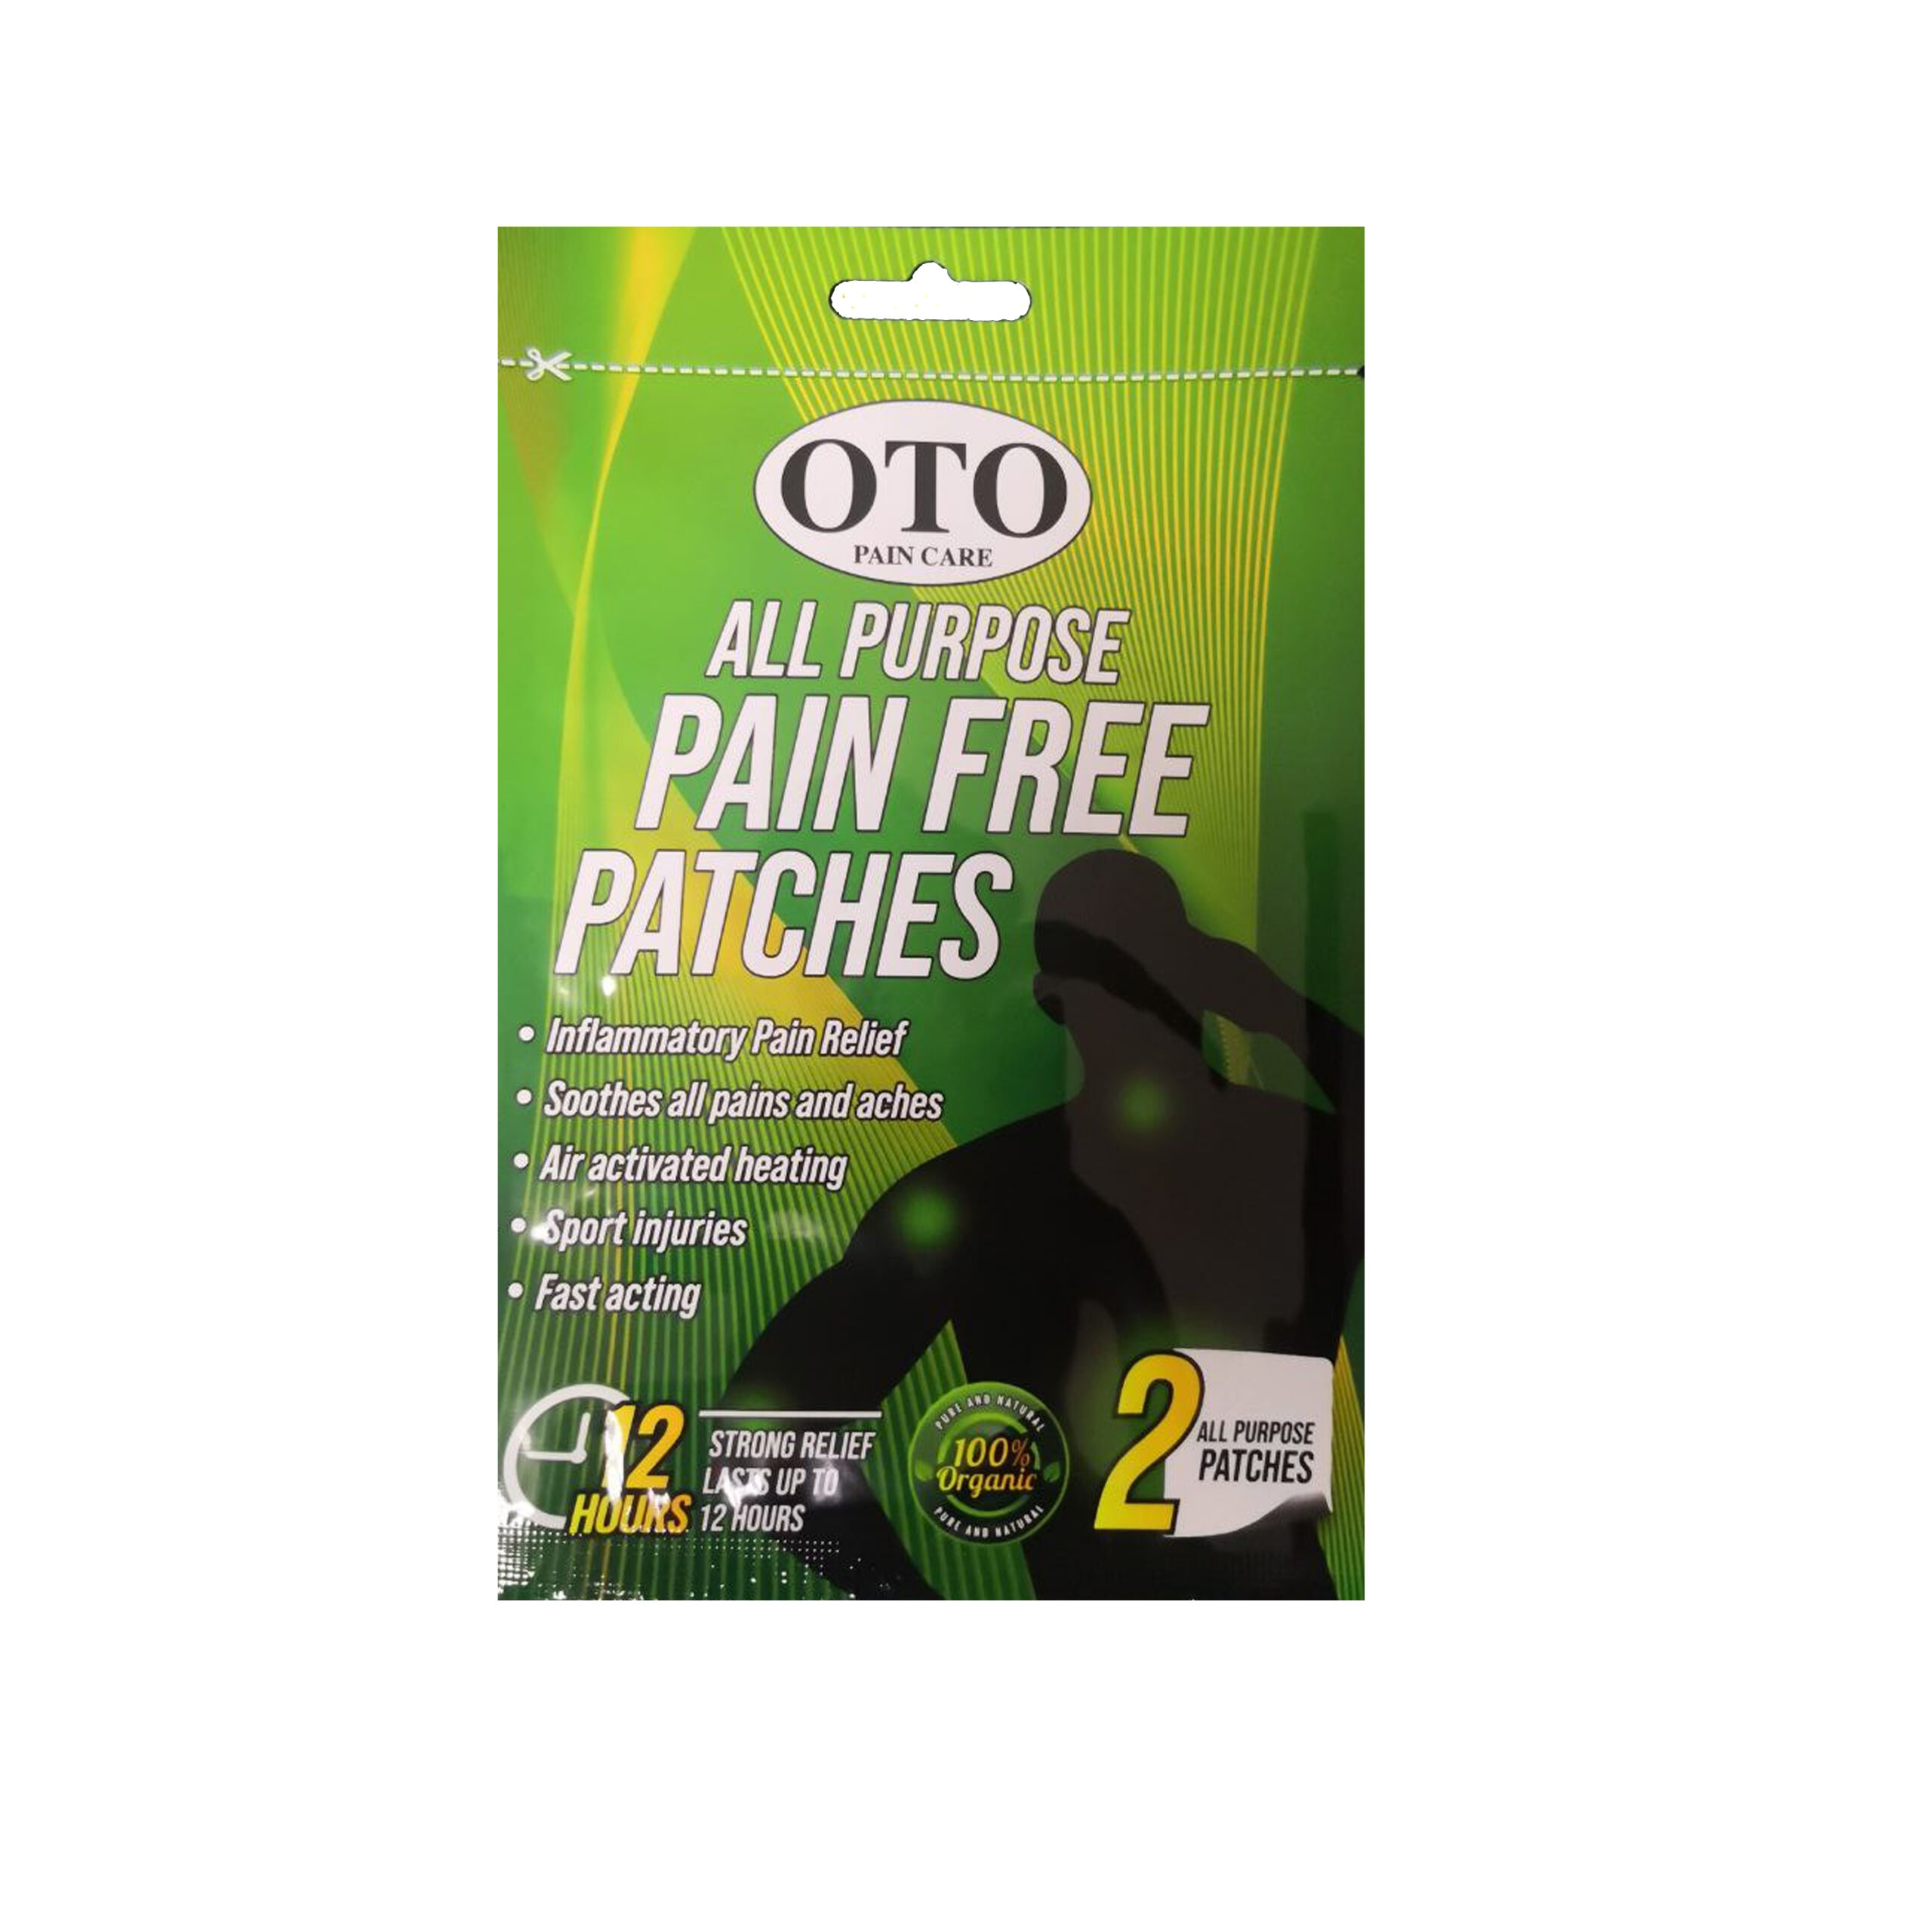 OTO ALL PURPOSE
PAIN FREE
PATCHES 2 PACK